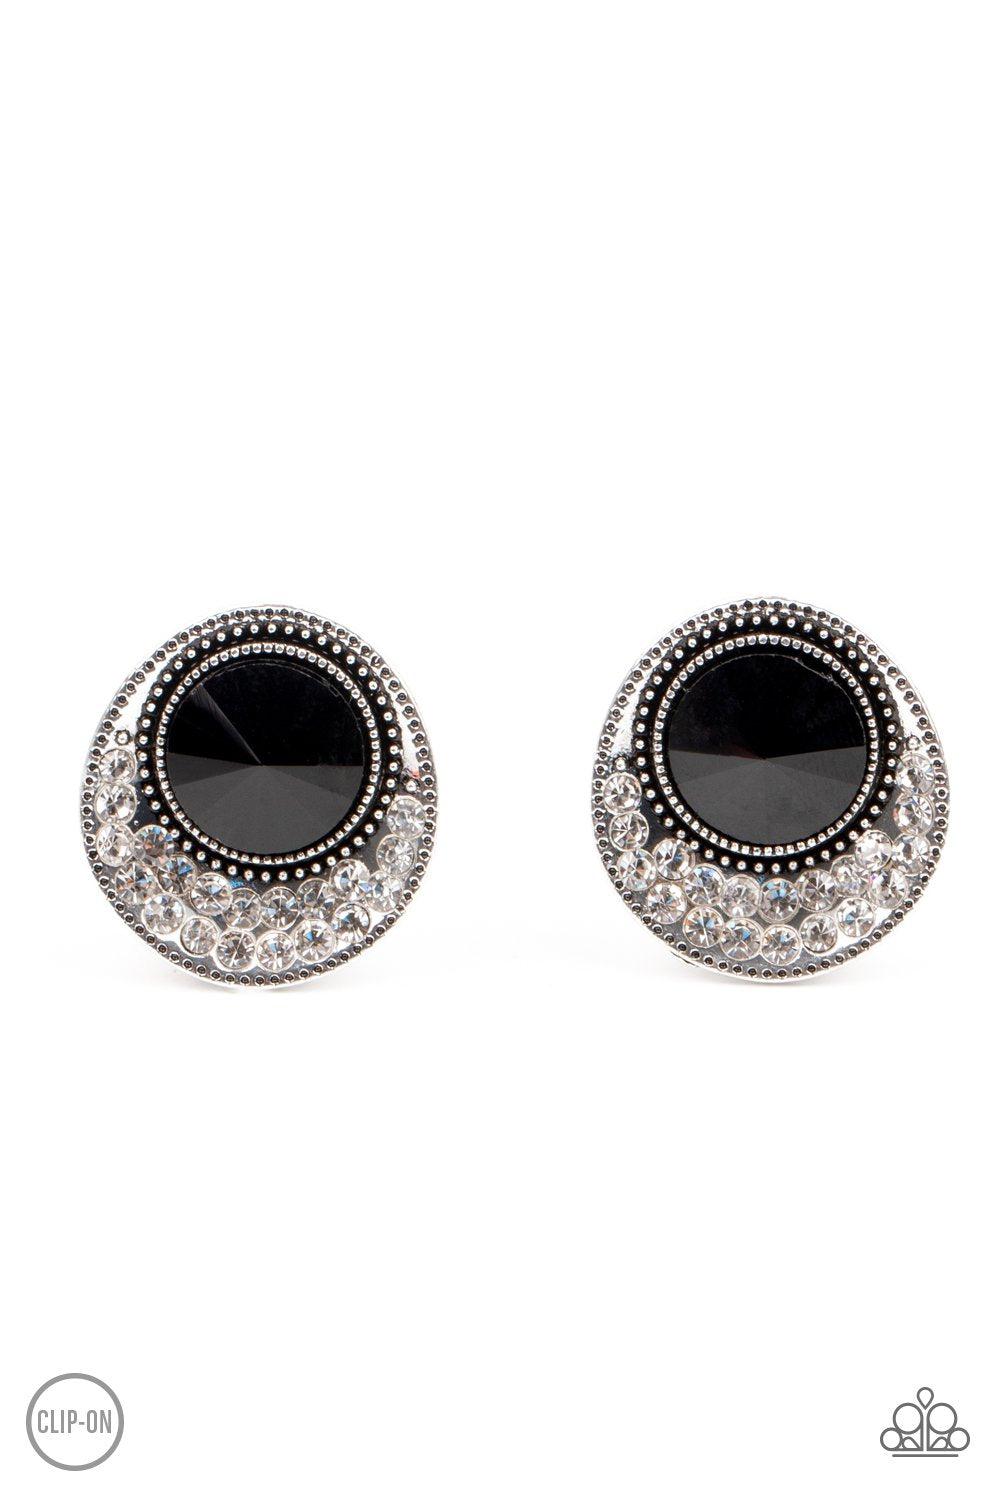 Off The RICHER Scale Black and White Rhinestone Clip-On Earrings - Paparazzi Accessories- lightbox - CarasShop.com - $5 Jewelry by Cara Jewels